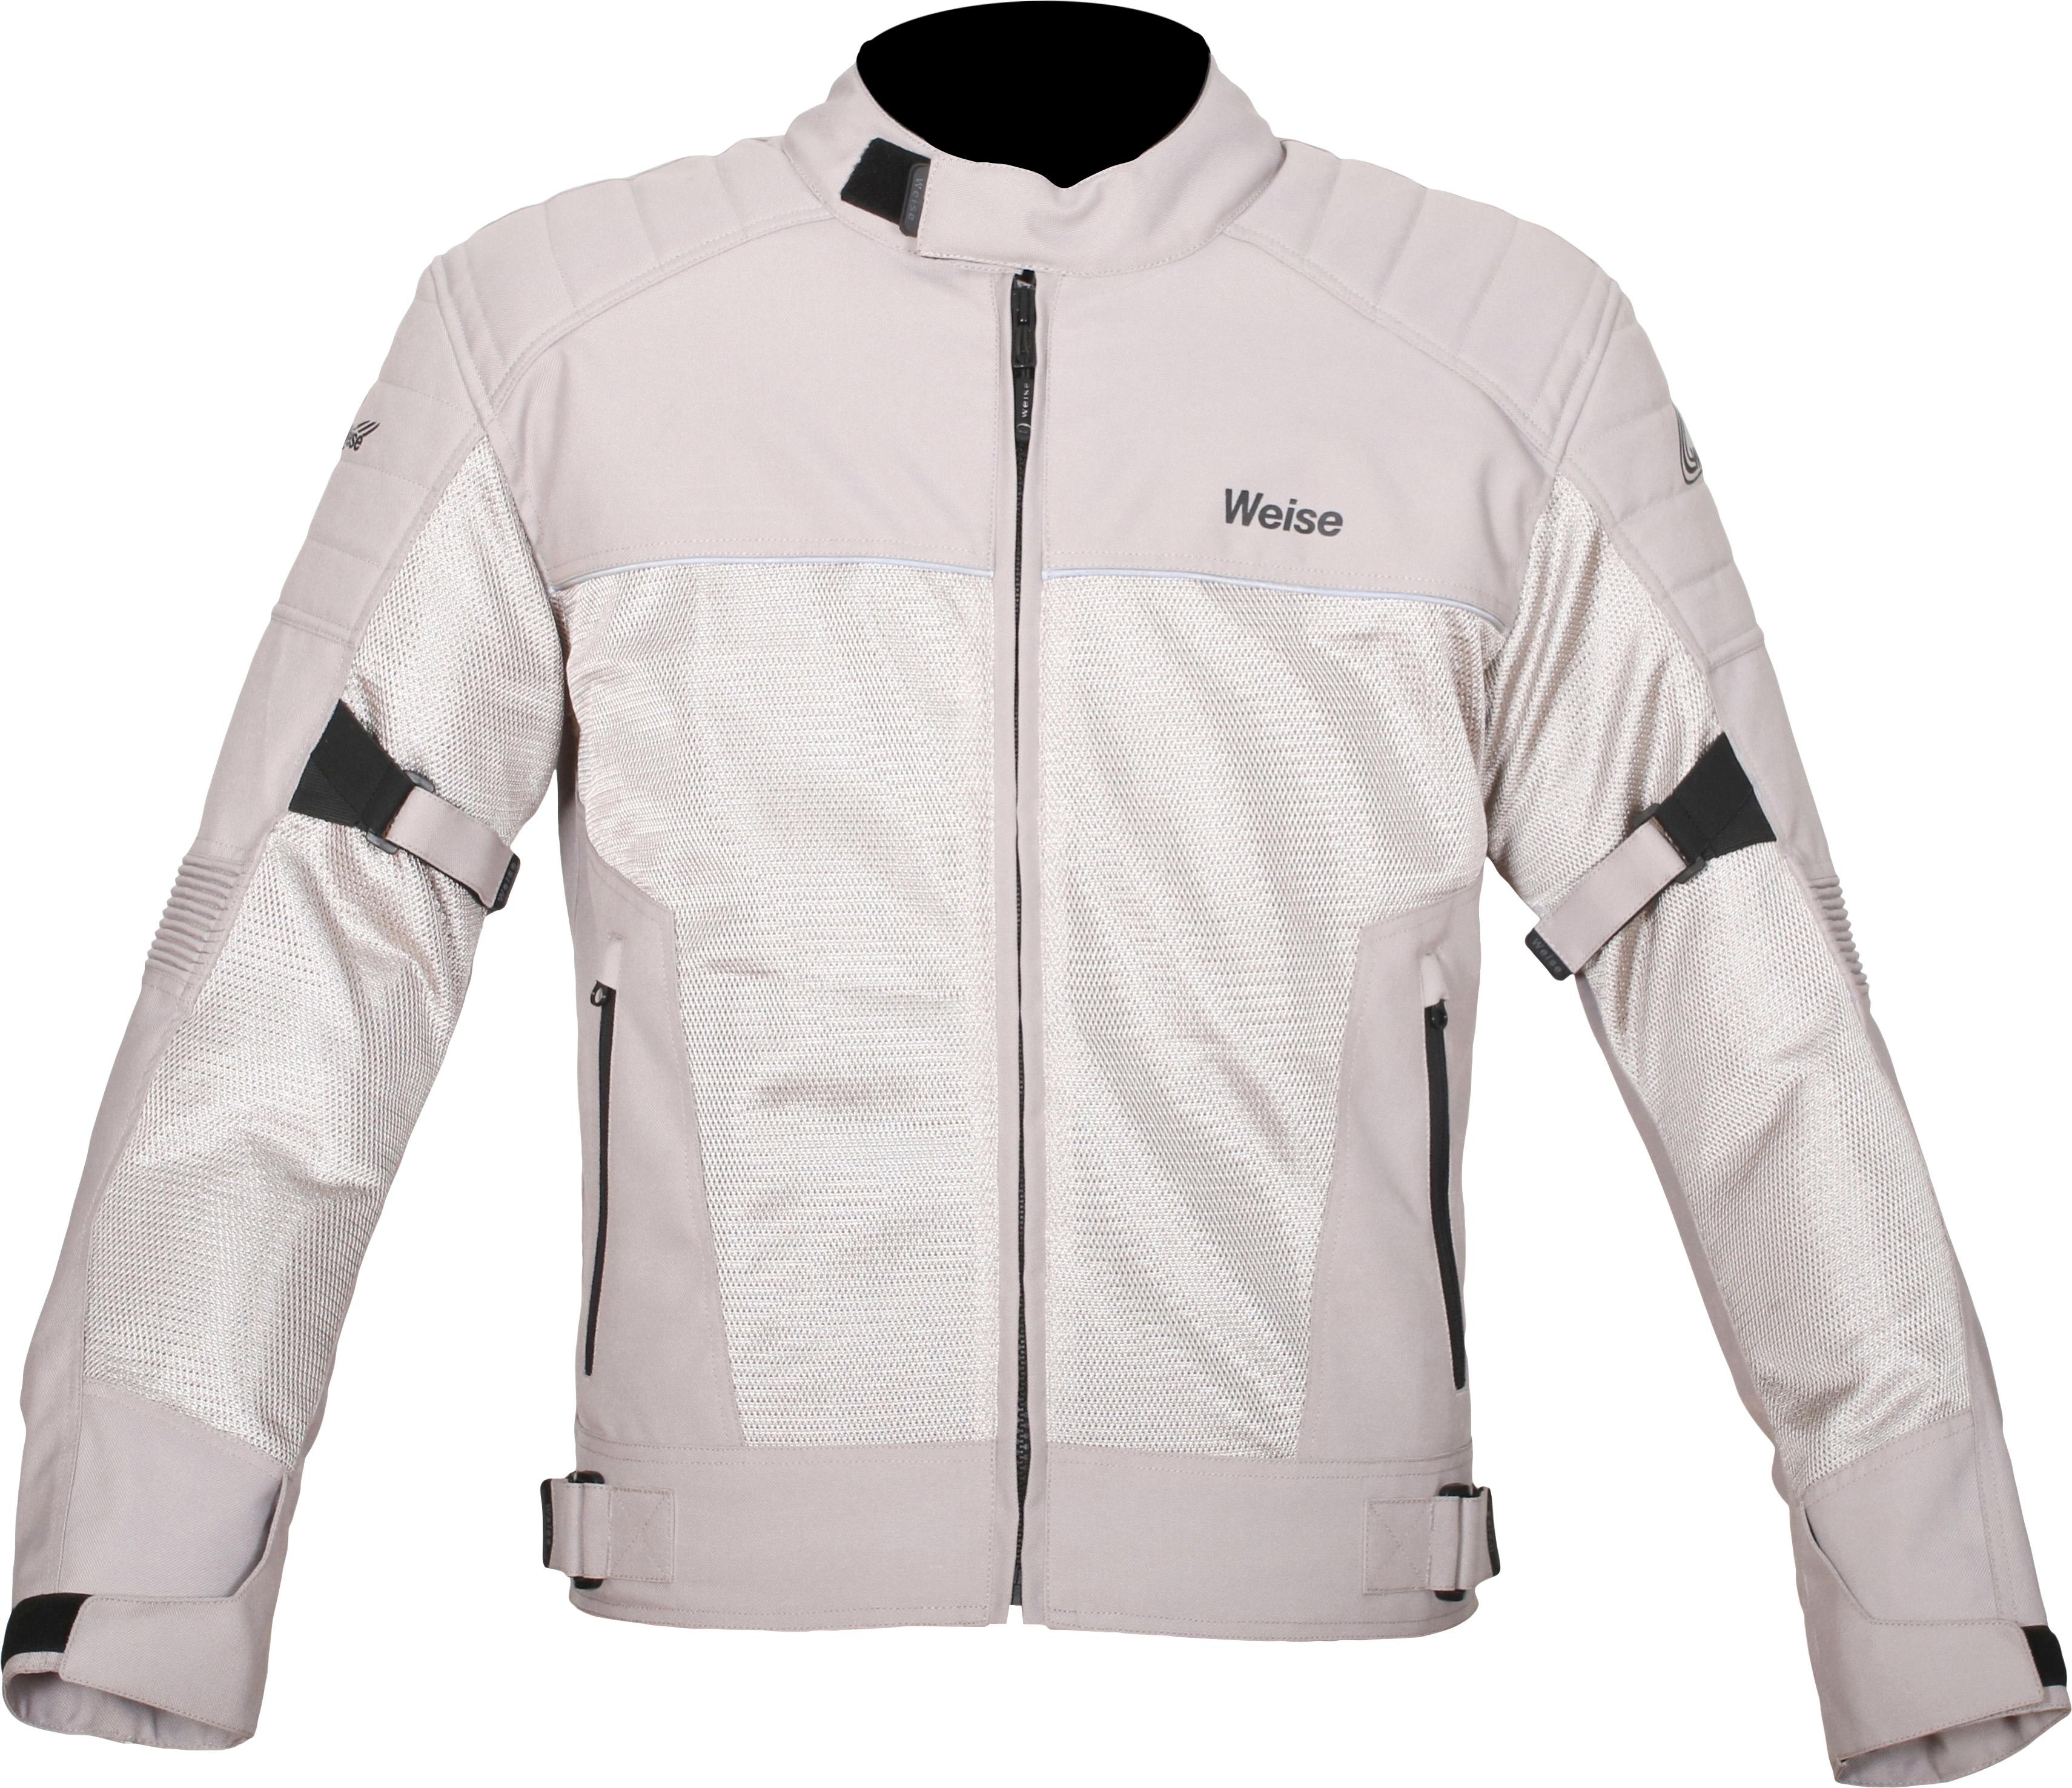 Weise Scout Motorcycle Jacket - Stone, L